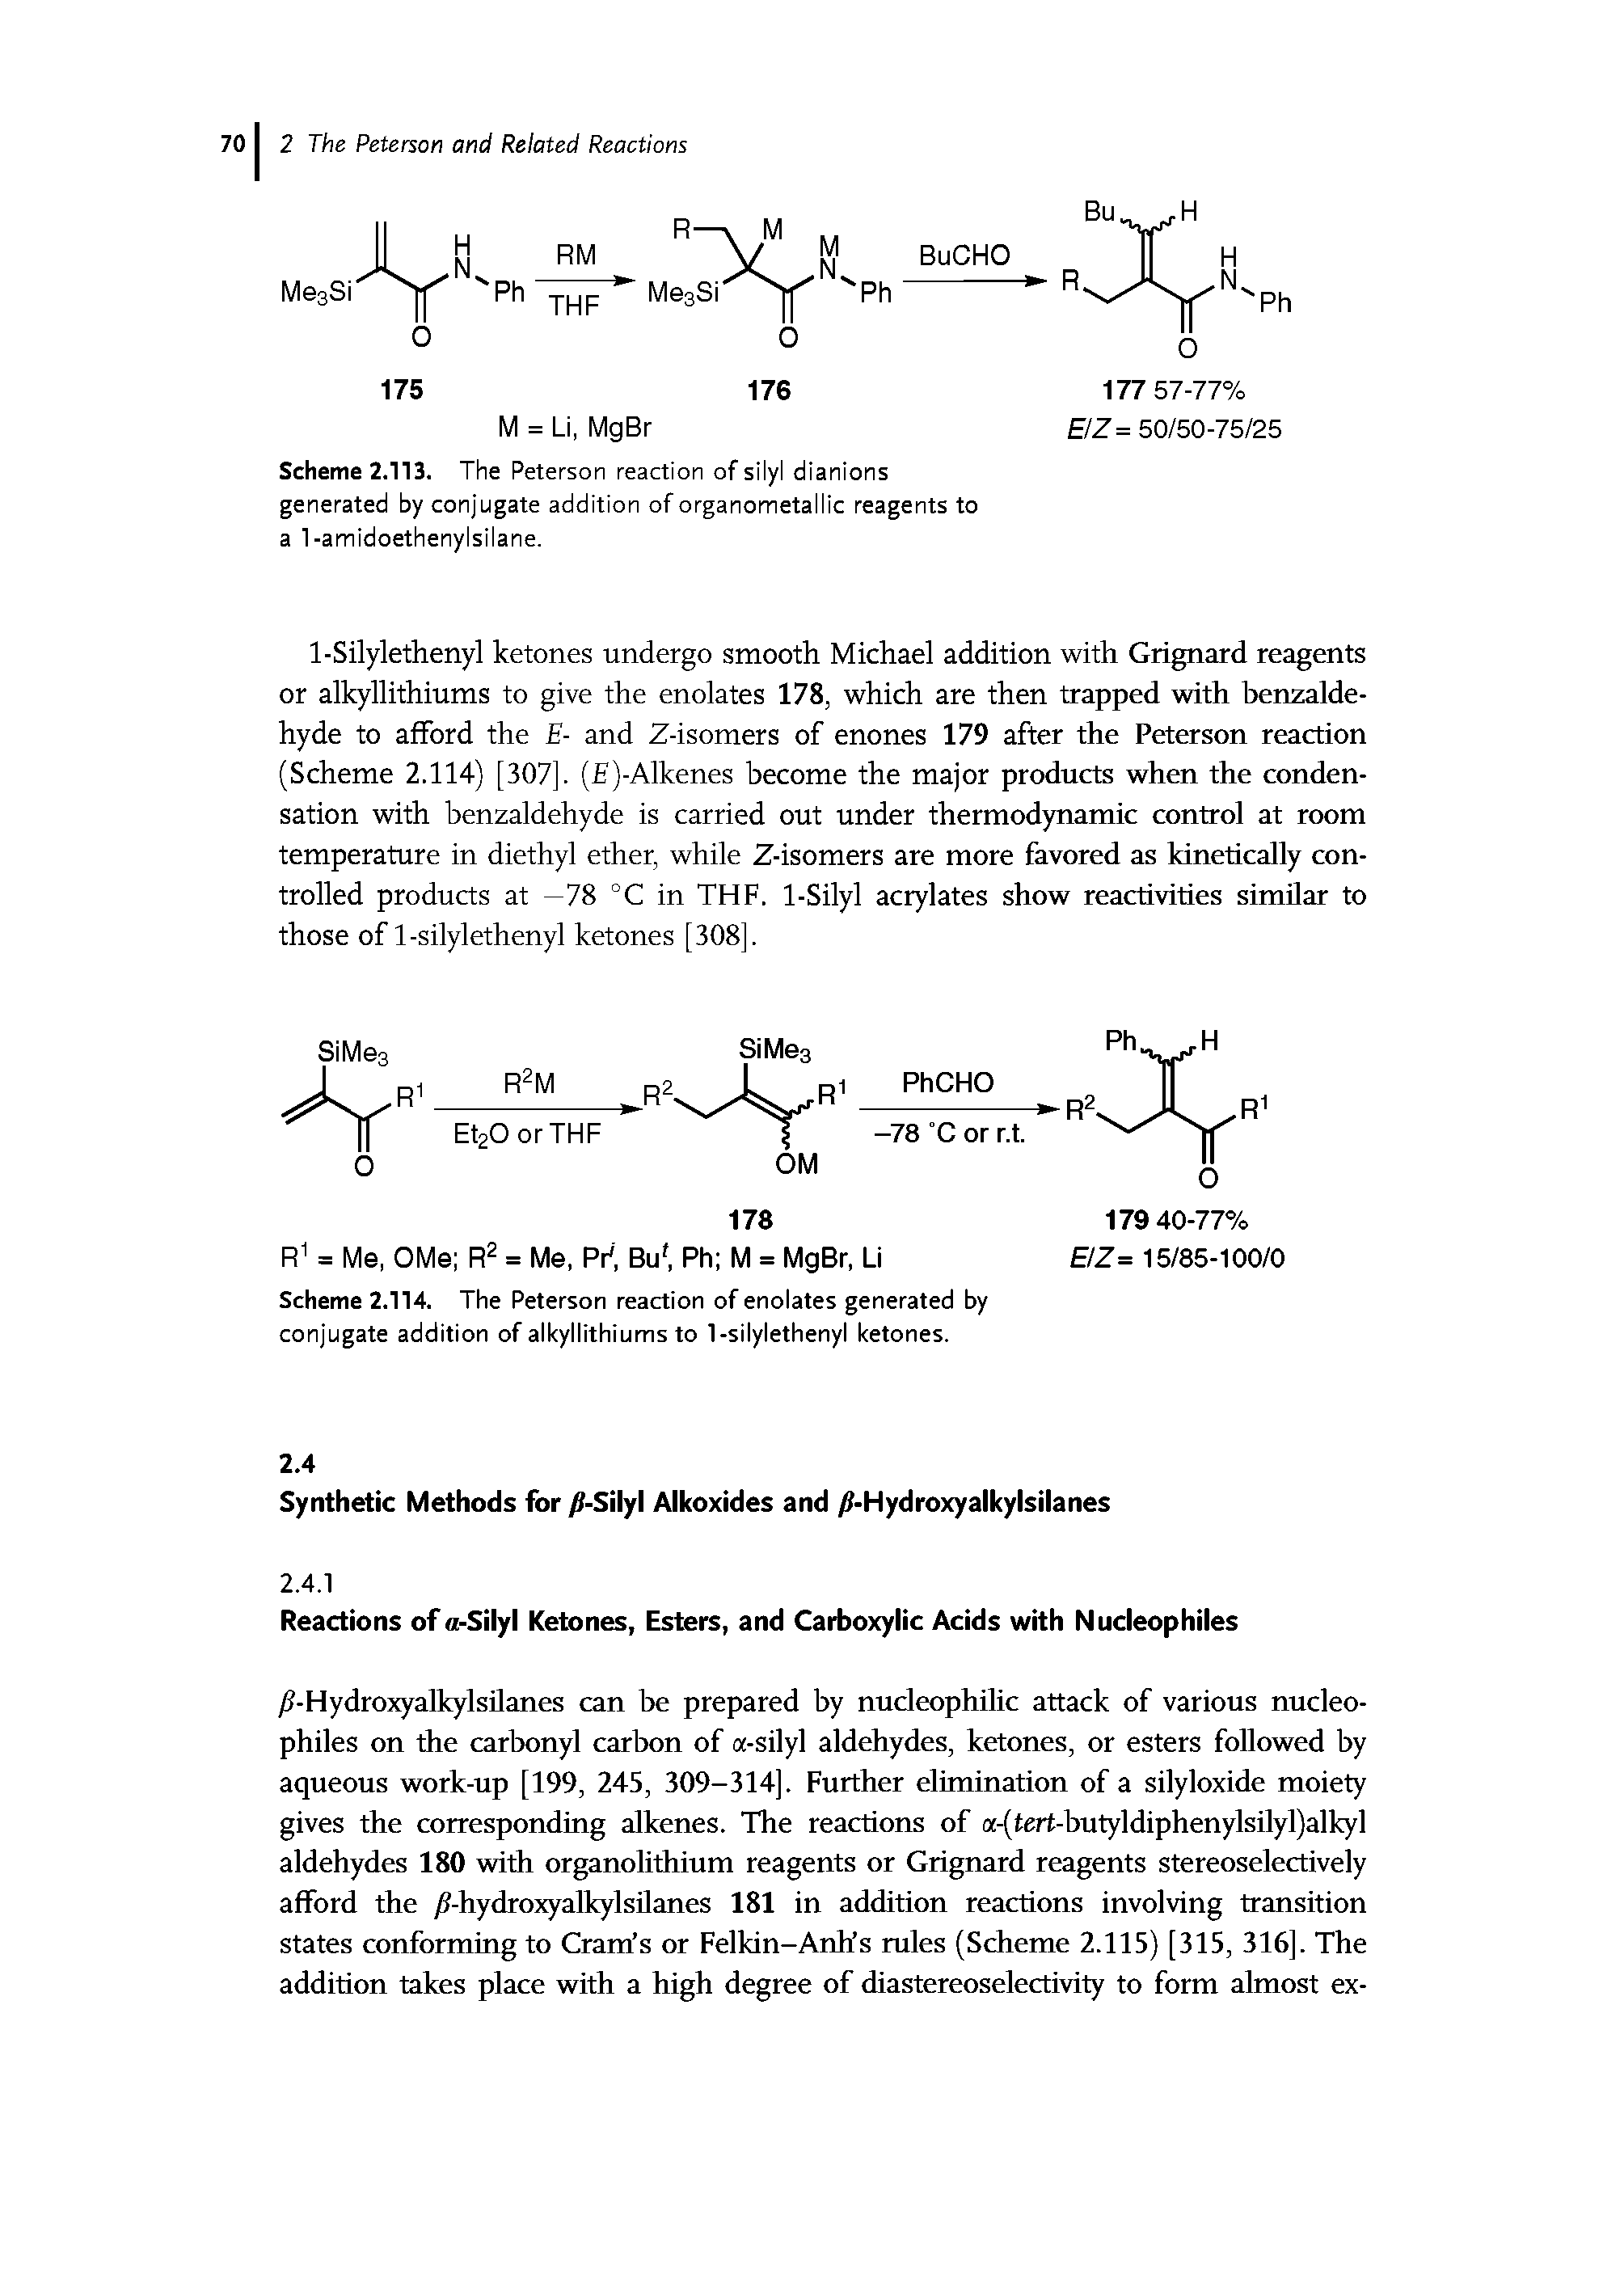 Scheme 2.113. The Peterson reaction of silyl dianions generated by conjugate addition of organometallic reagents to a 1-amidoethenylsilane.